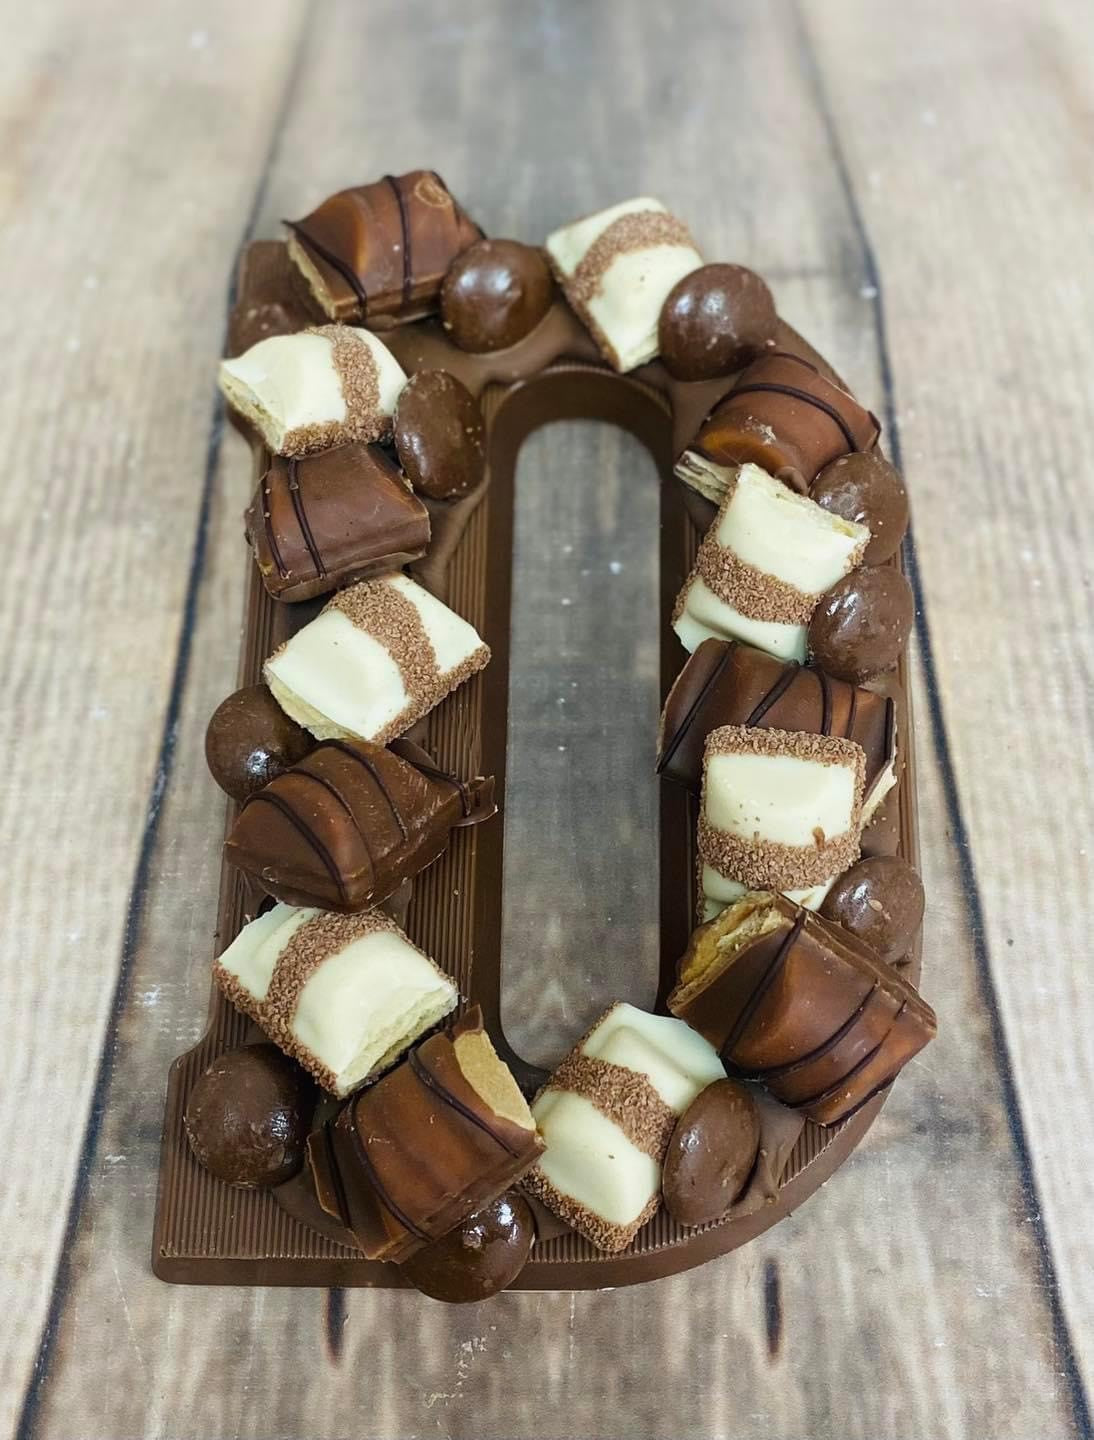 Loaded Chocolate Letter - Kinder Bueno